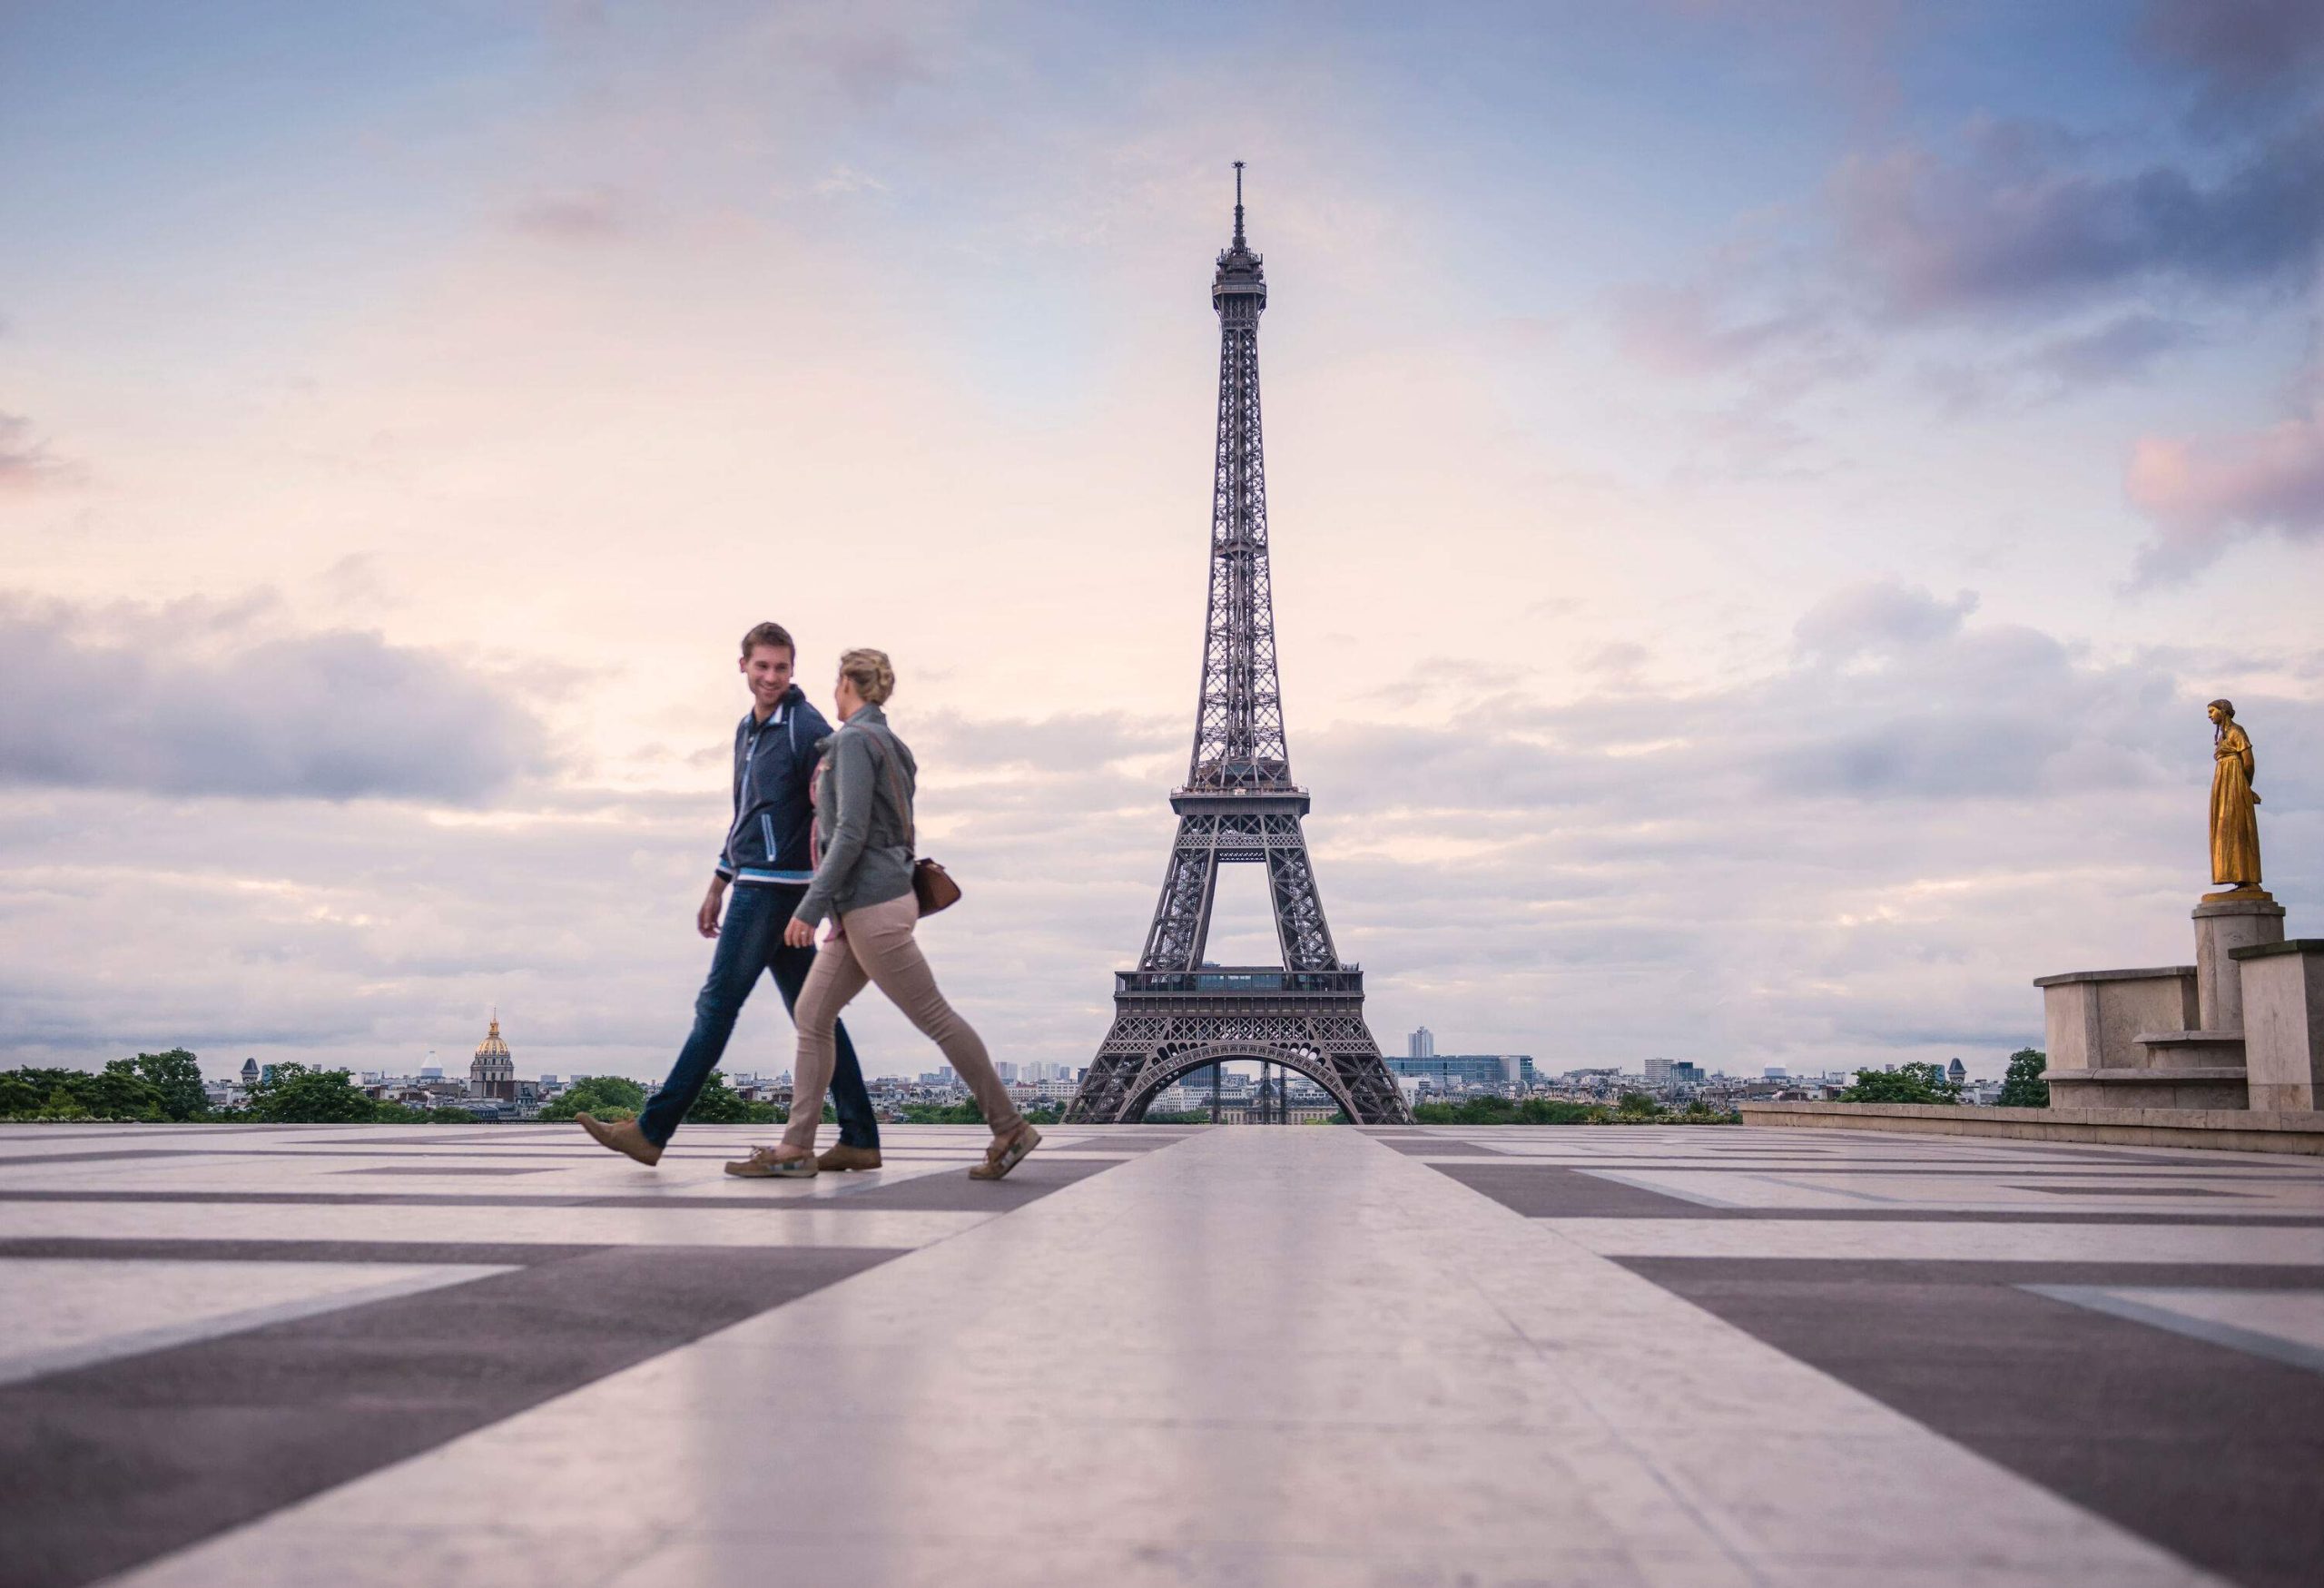 A happy couple walks on a platform with a view of the majestic Eifel Tower, captured against the scenic twilight.